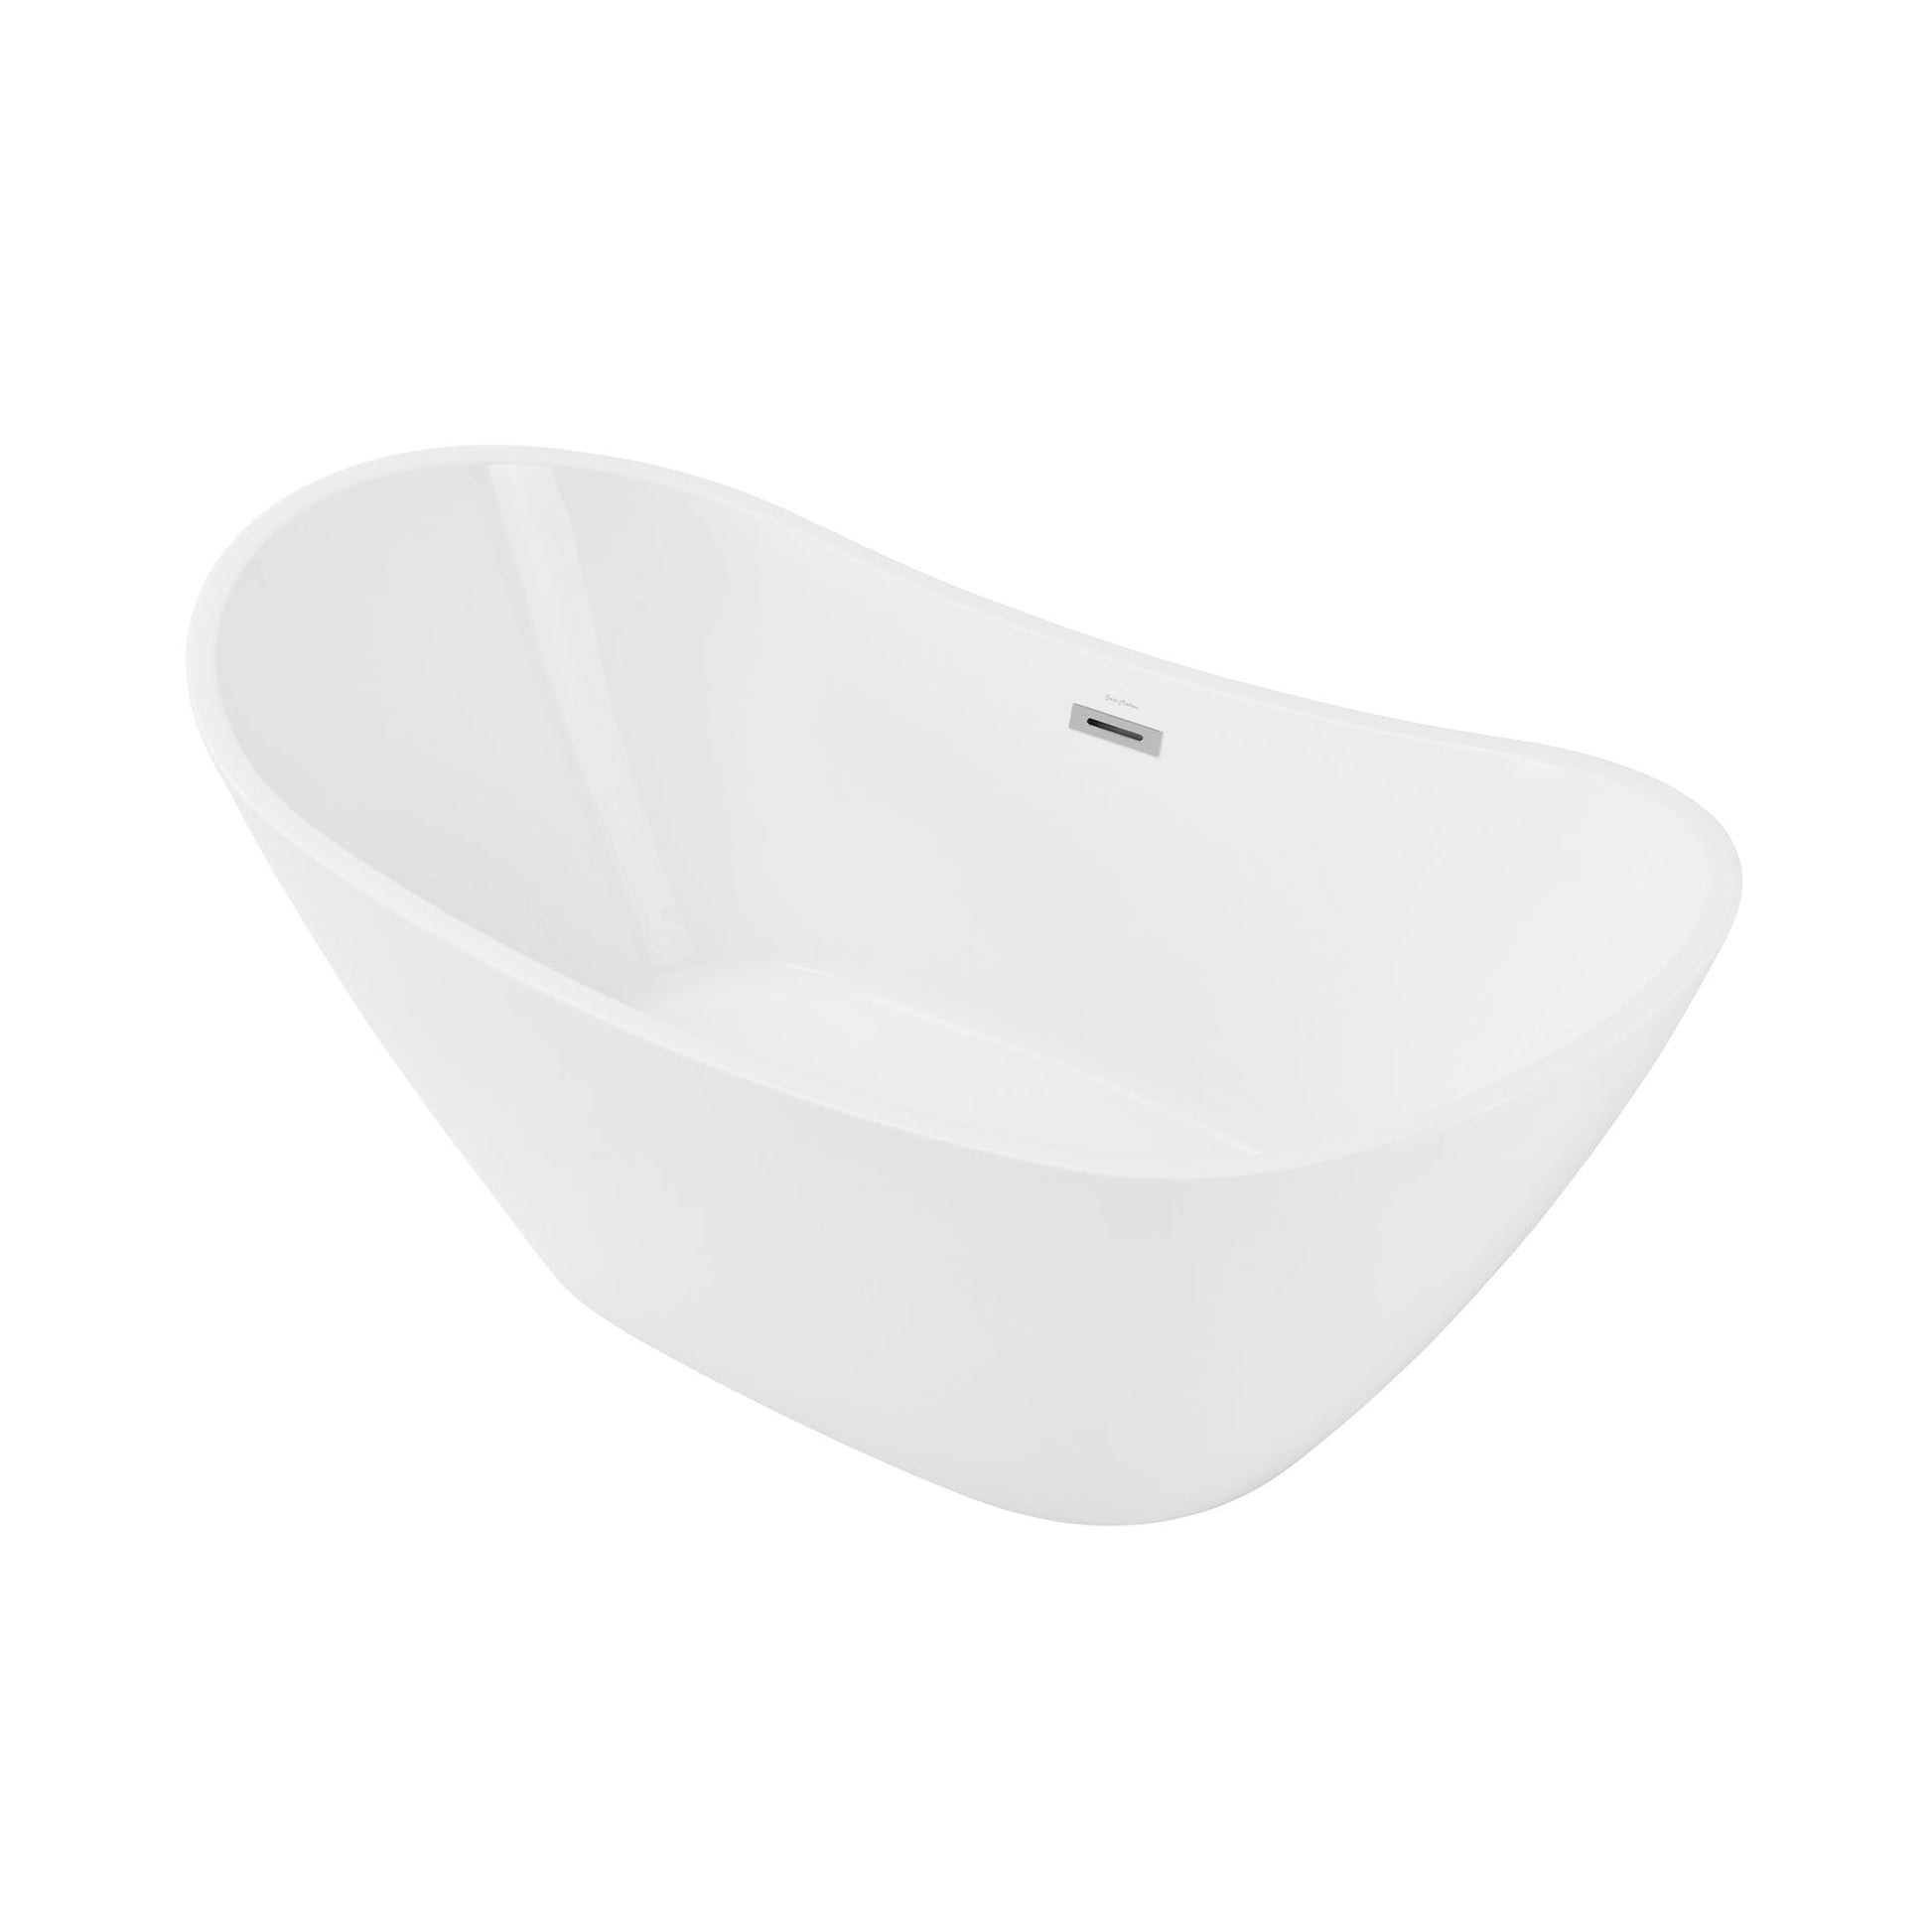 Swiss Madison Ivy 67" x 30" White Center Drain Freestanding Bathtub With Chrome Toe-Tap Drain and Overflow